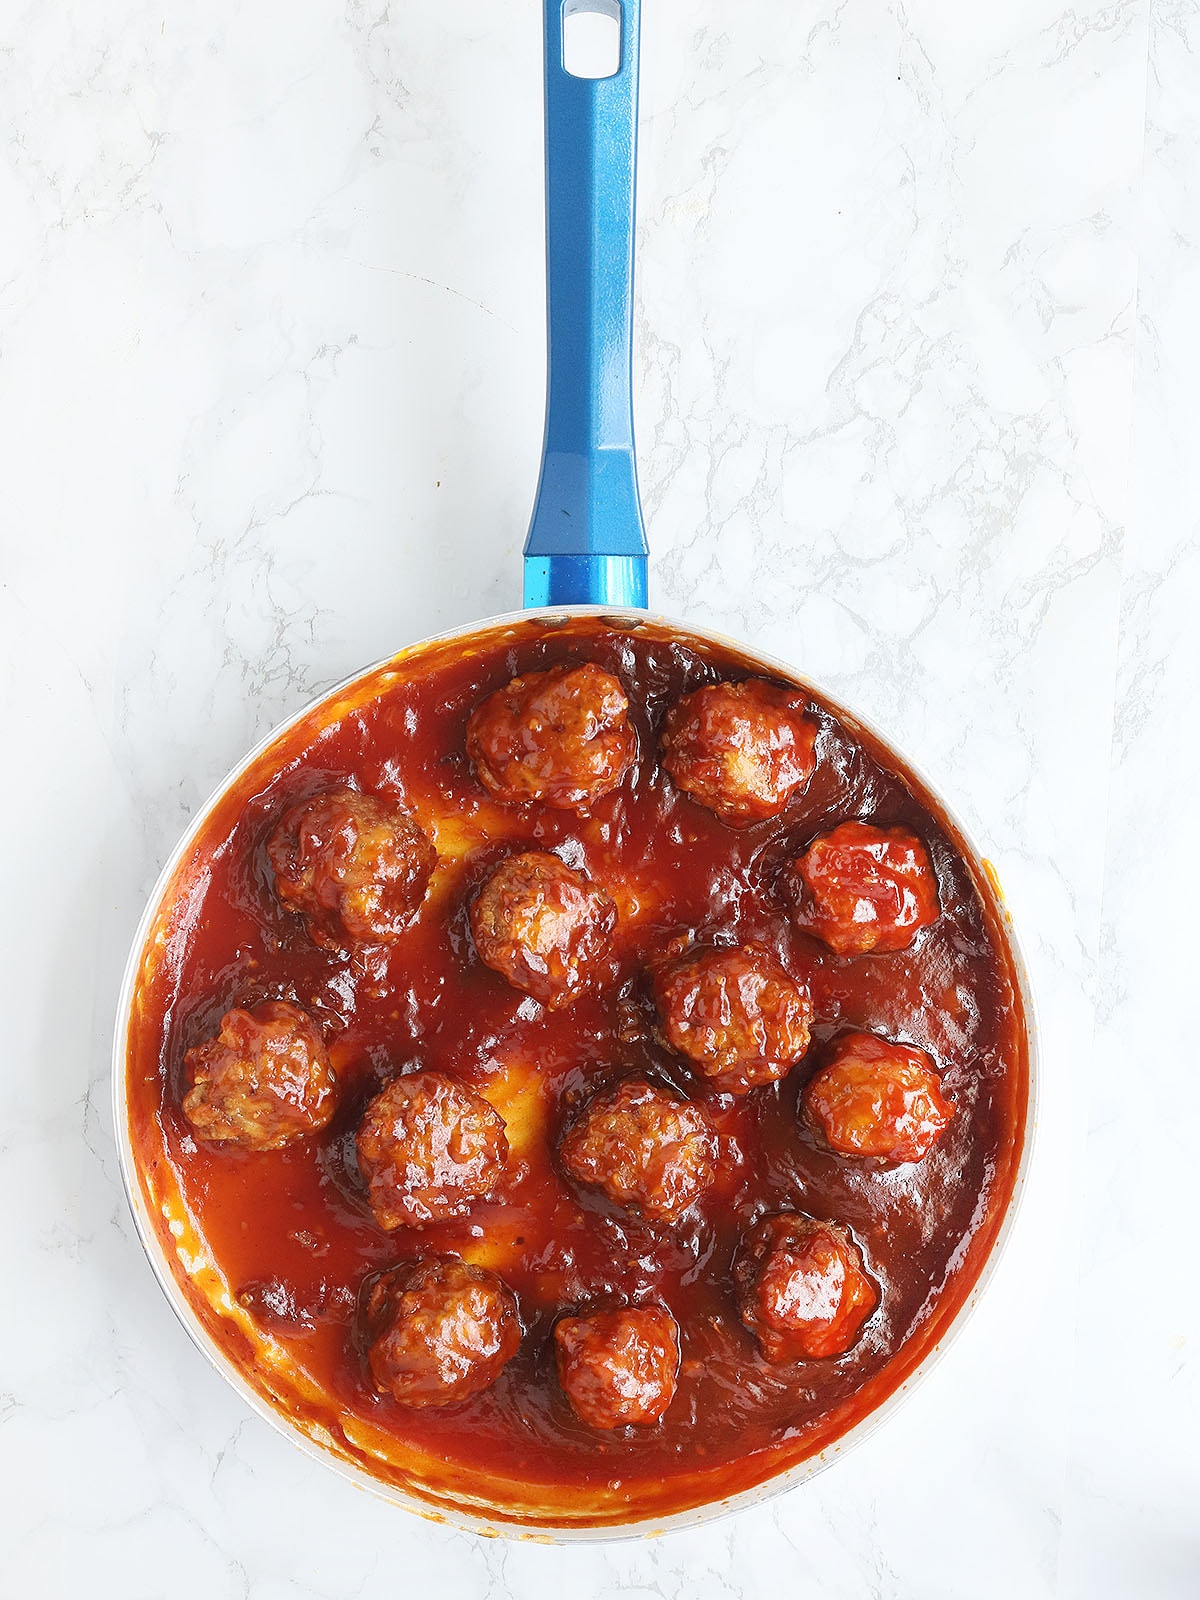 skillet of glazed meatballs on a white marble background